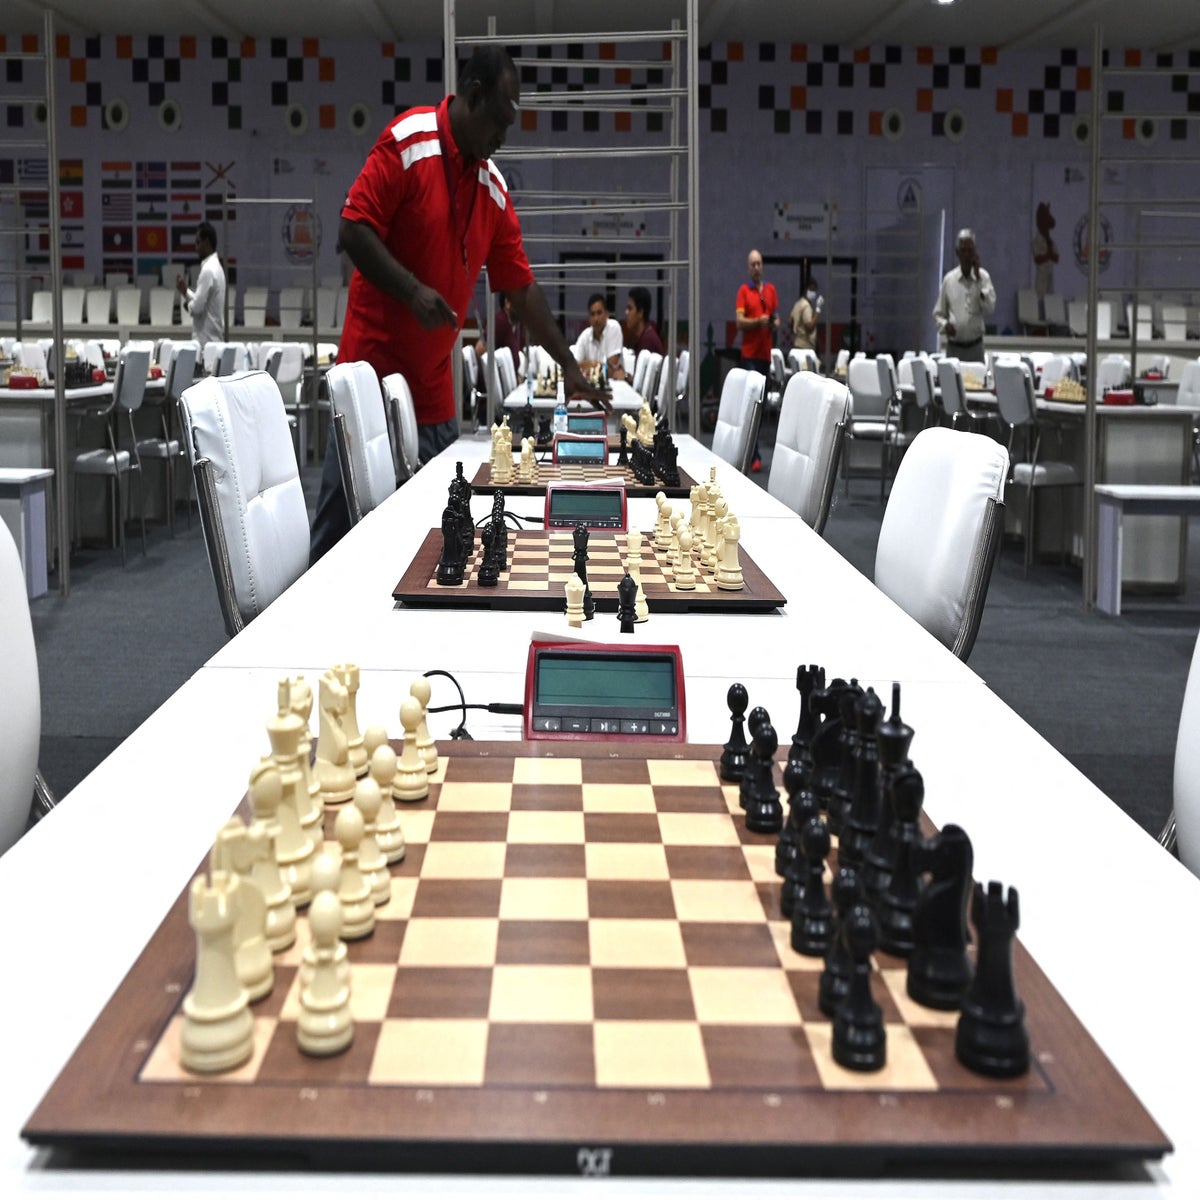 India flays Pakistan for 'politicising' Chess Olympiad